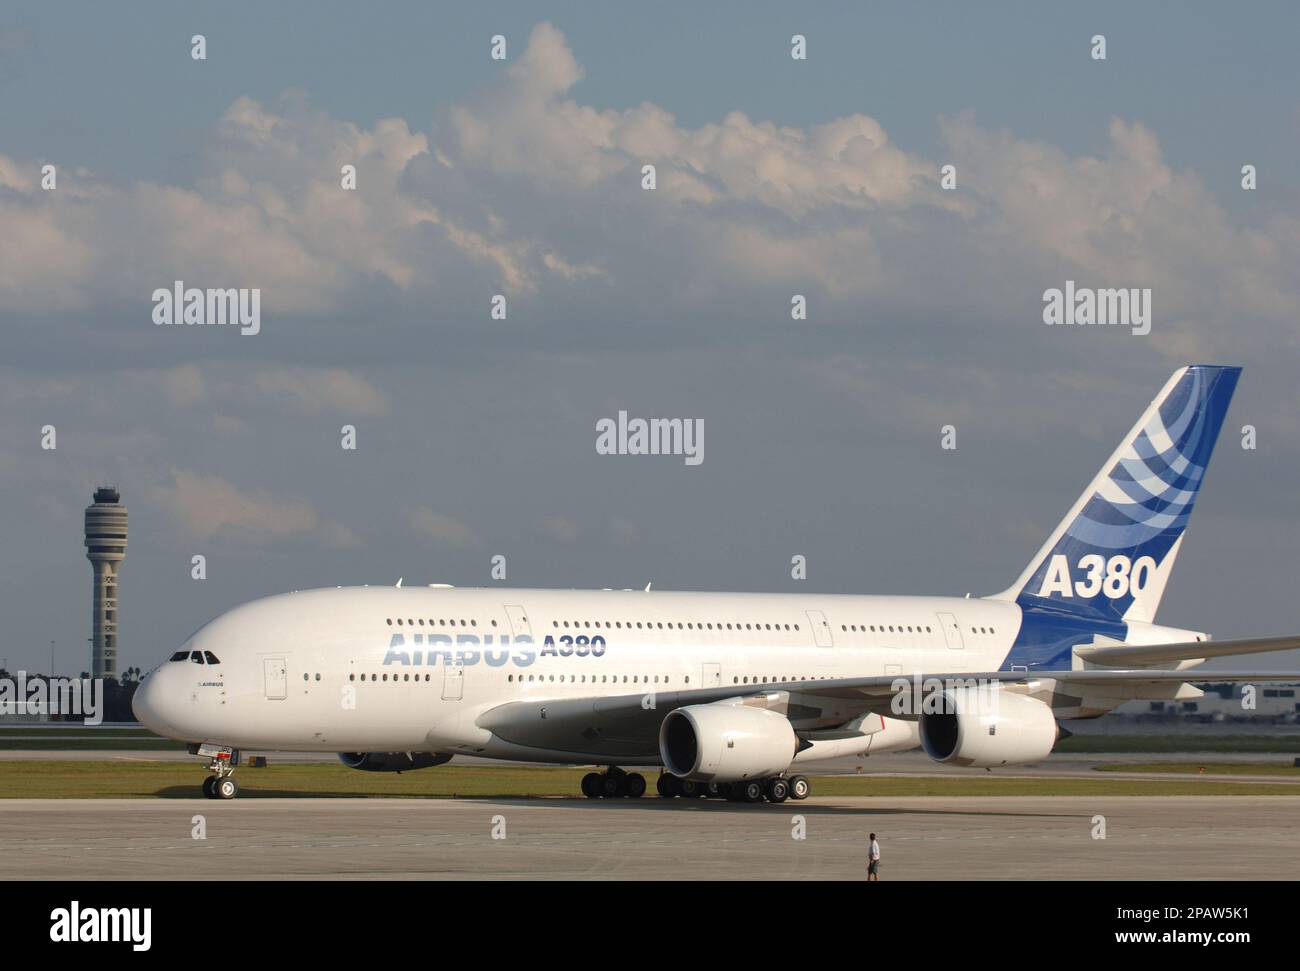 The world's largest passenger plane, the Airbus A380, landed at